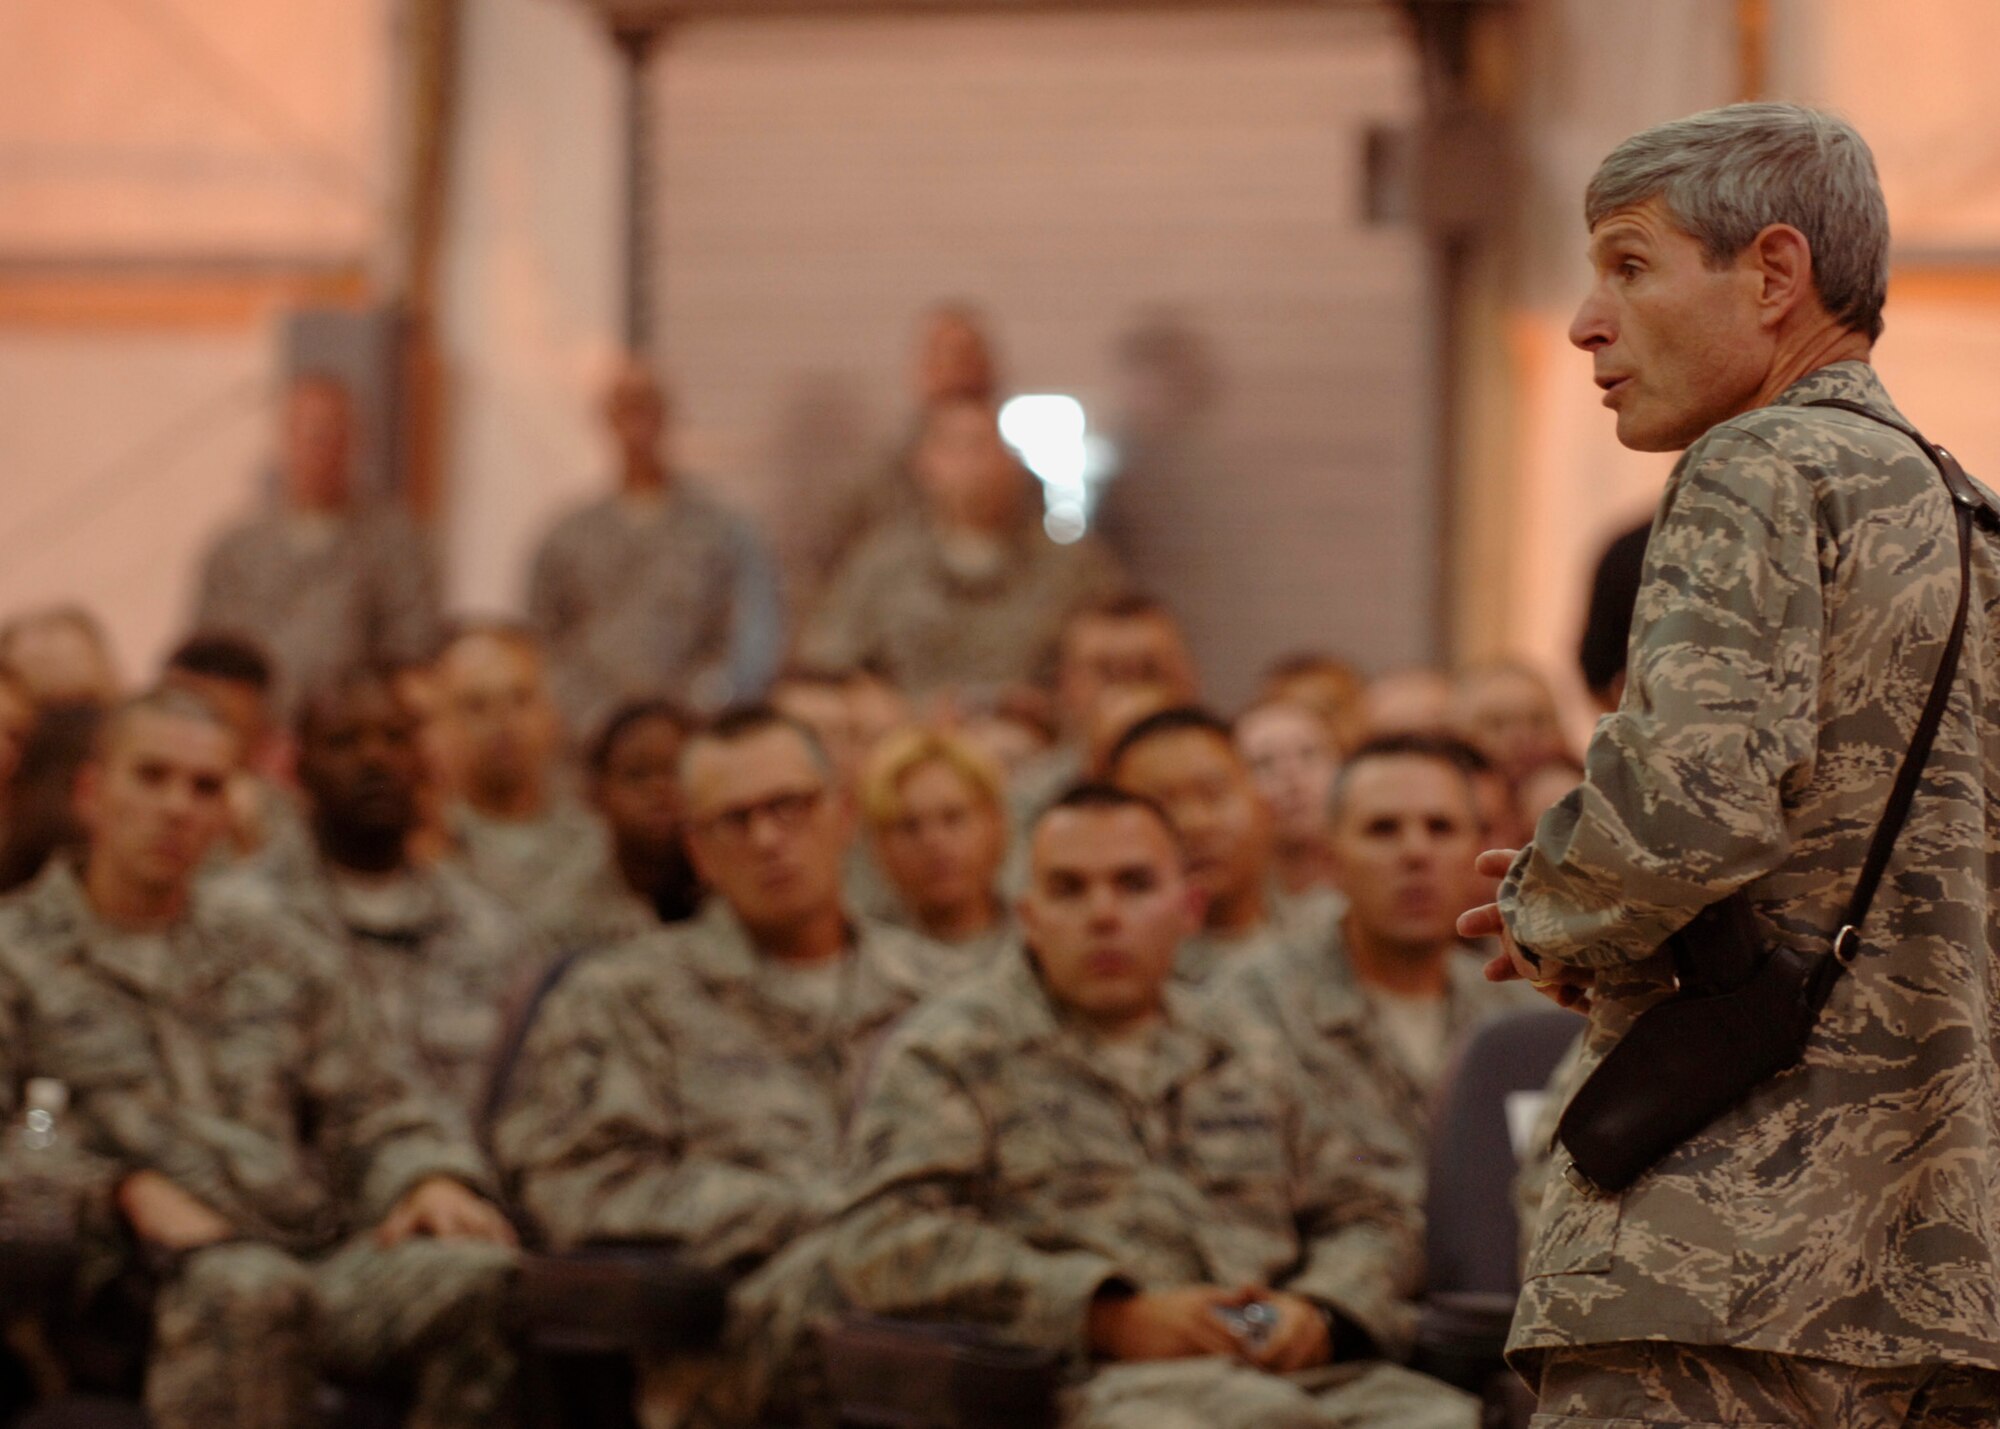 Air Force Chief of Staff Gen. Norton Schwartz speaks to Airmen from the 447th Air Expeditionary Group at Sather Air Base, Iraq, Oct. 24. General Schwartz spoke to Airmen about career field reorganization, deployment training and the on-going operations in Iraq. This is the CSAF's first trip to Iraq since assuming his current position as the Air Force chief of staff. (U.S. Air Force photo/Staff Sgt. Paul Villanueva II)